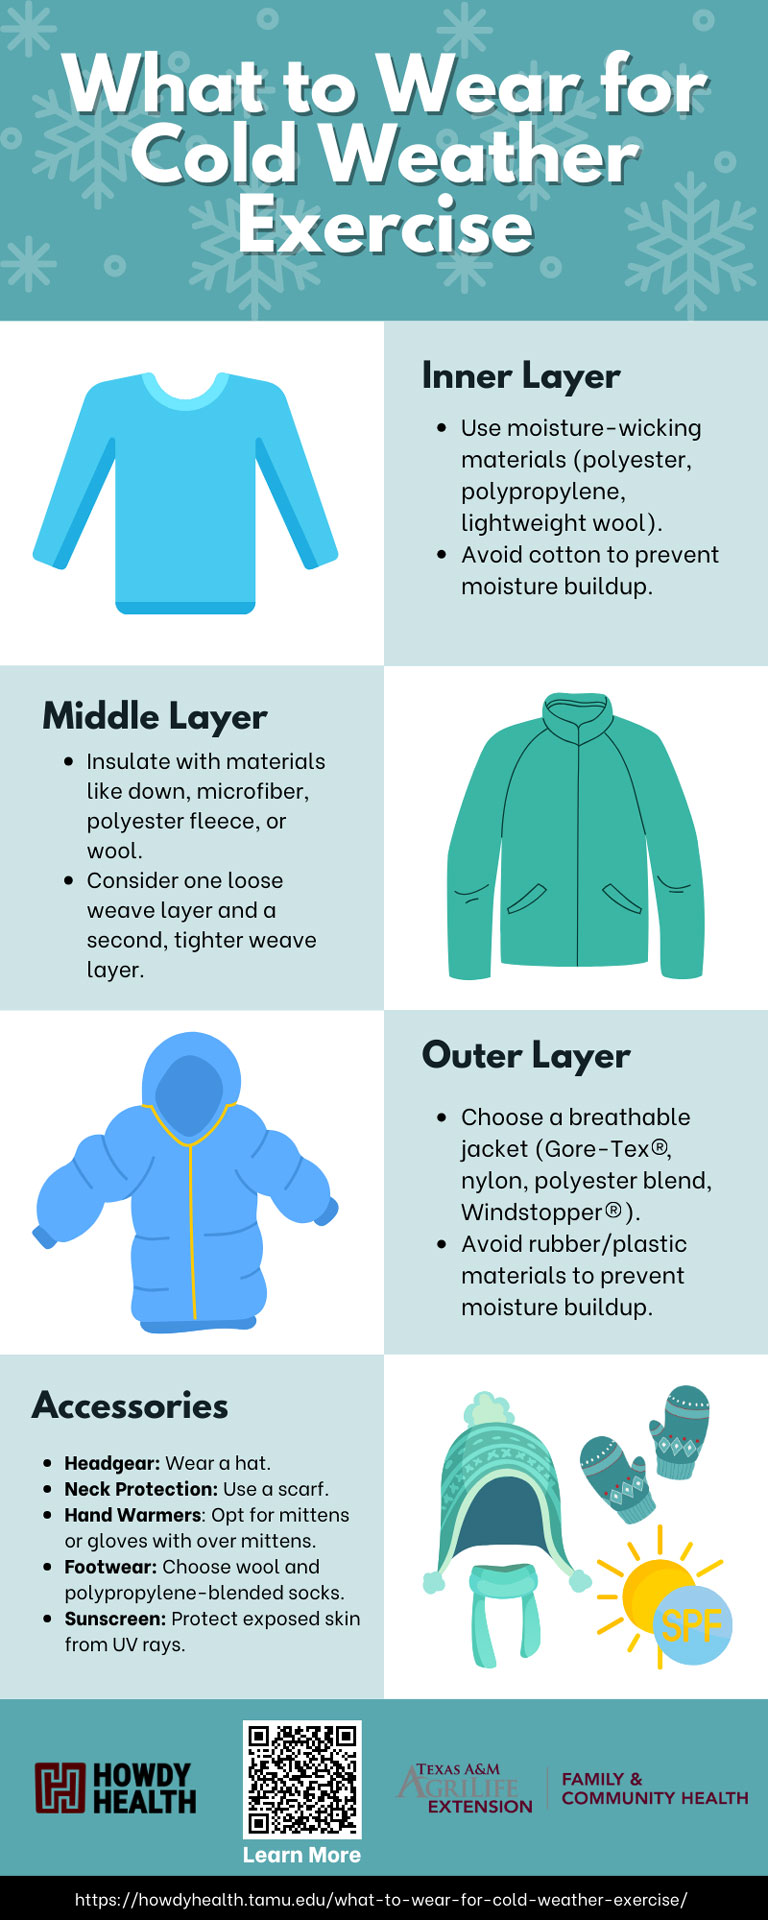 What to Wear for Cold Weather Exercise